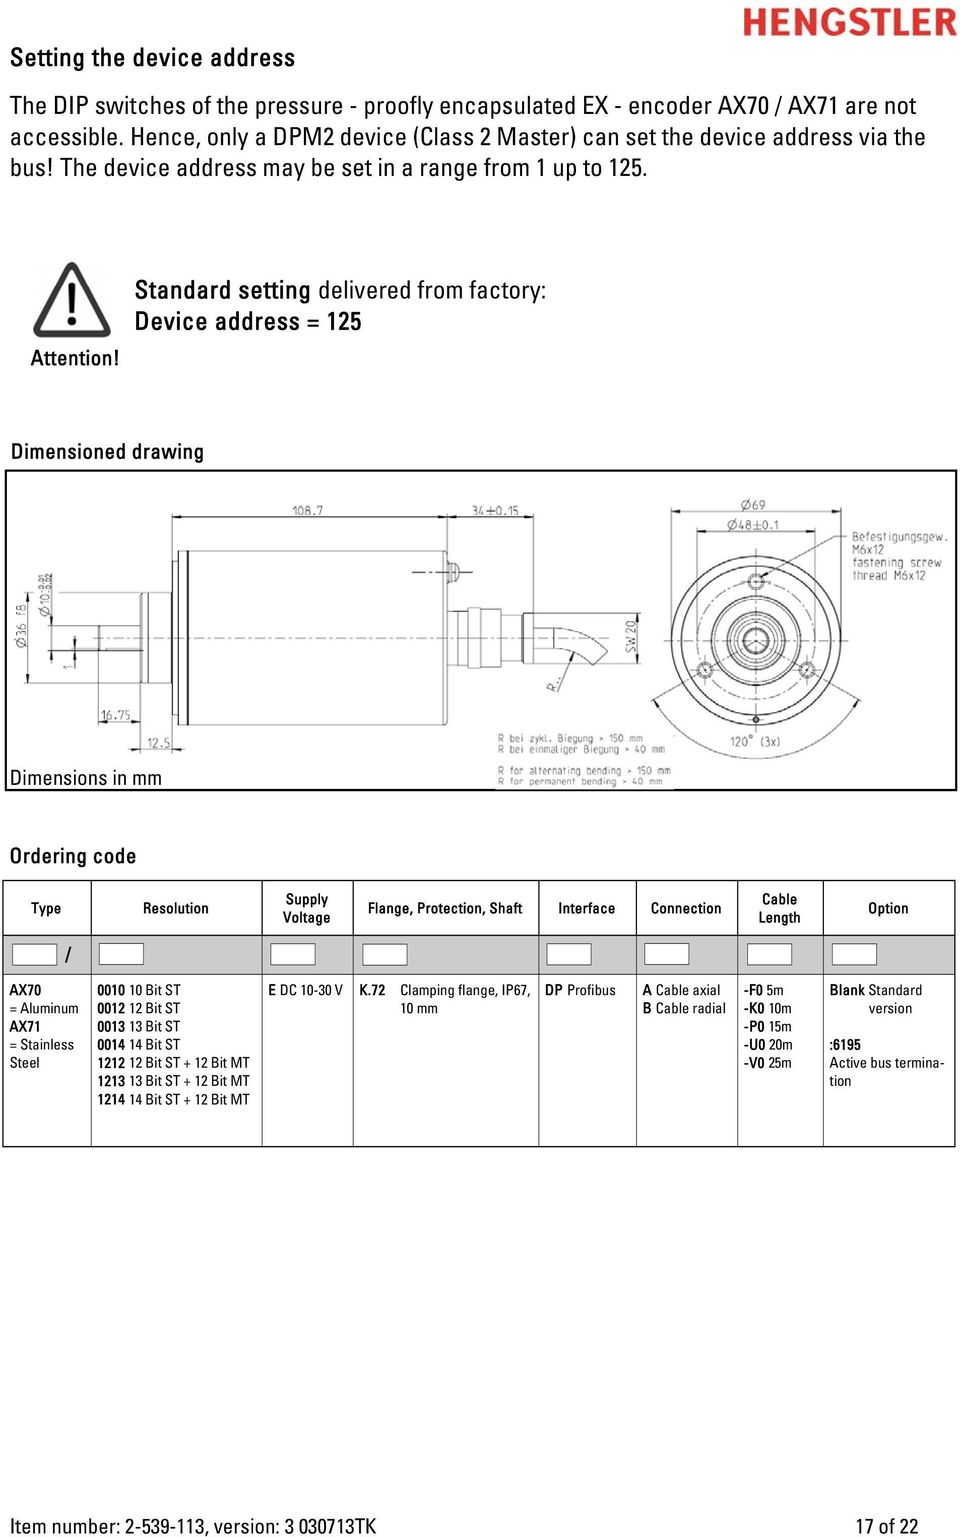 Standard setting delivered from factory: Device address = 125 Dimensioned drawing Dimensions in mm Ordering code Type Resolution Supply Voltage Flange, Protection, Shaft Interface Connection Cable